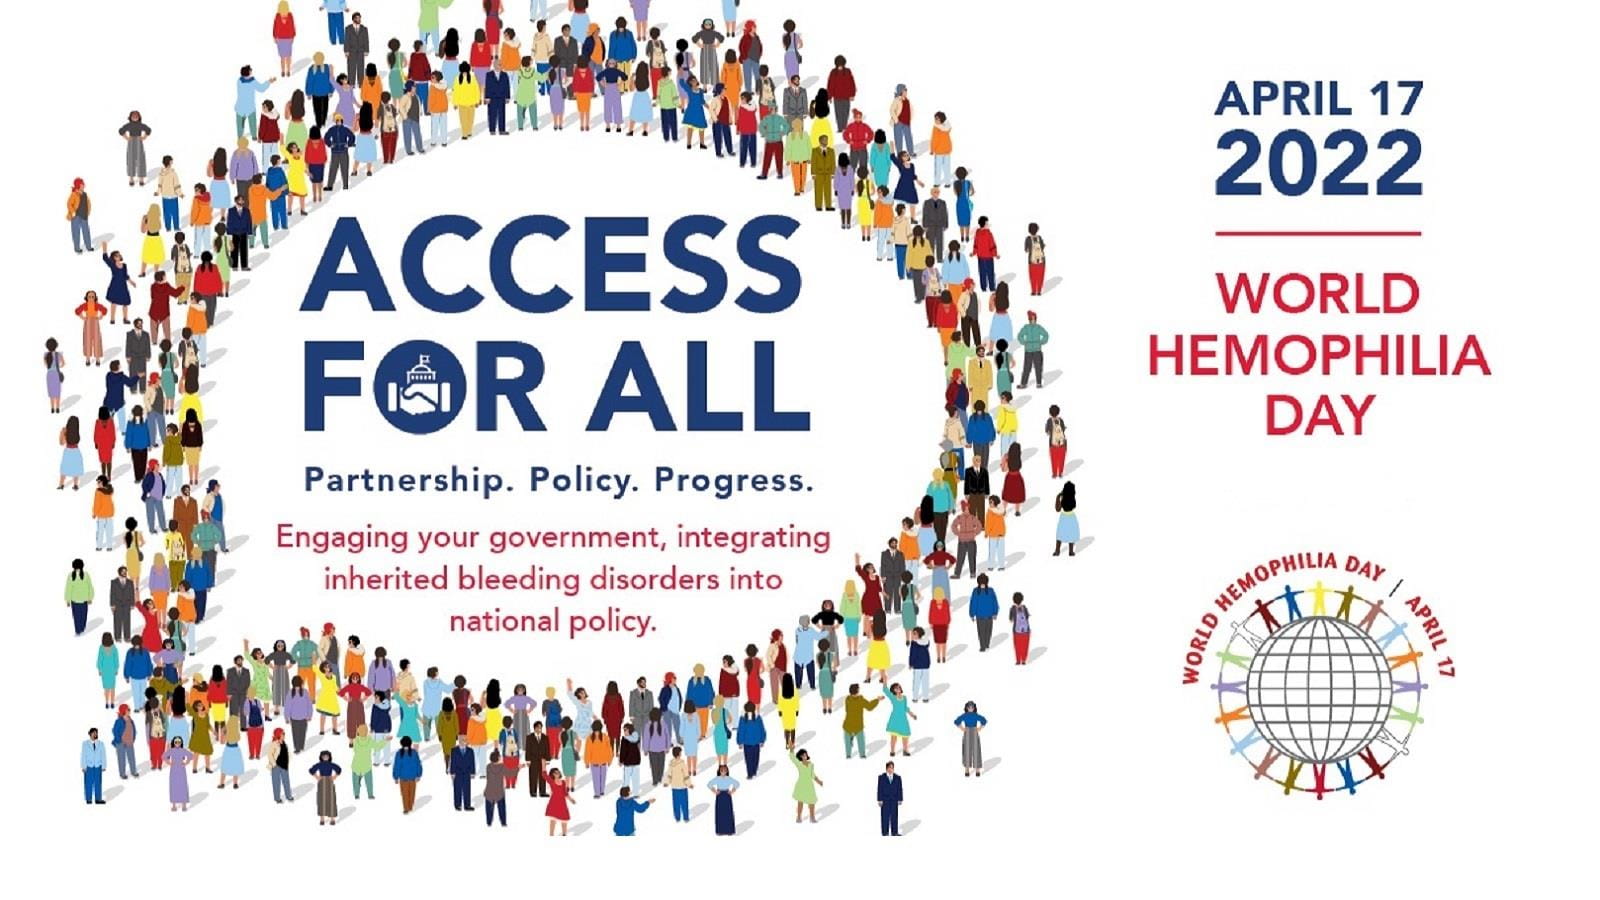 Graphic of people standing in speech bubble around words "Access For All" with dates for World Haemophilia Day